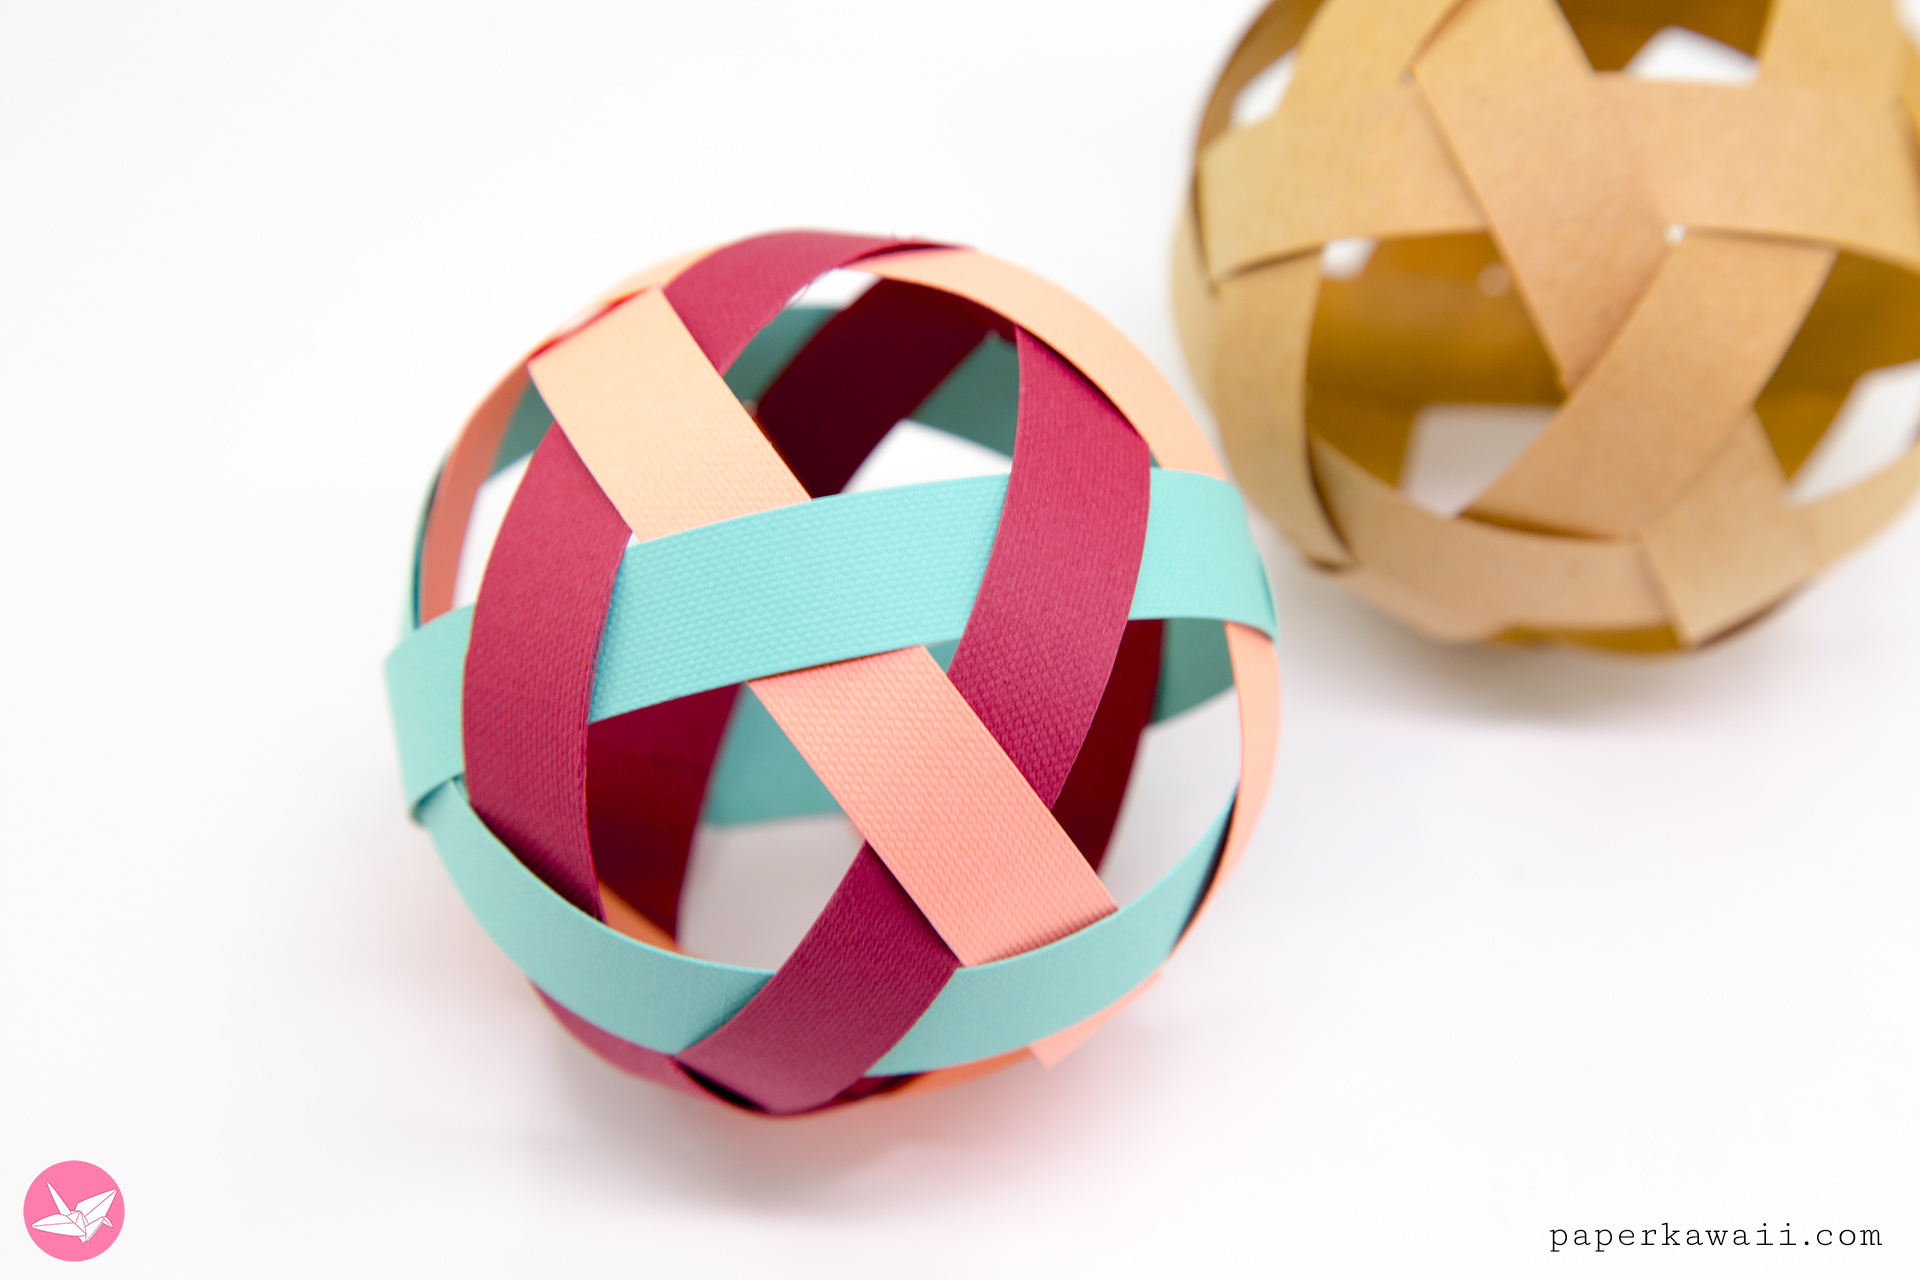 Origami Lantern Ball Instructions Easy Woven Paper Ball Decoration Tutorial Paper Kawaii